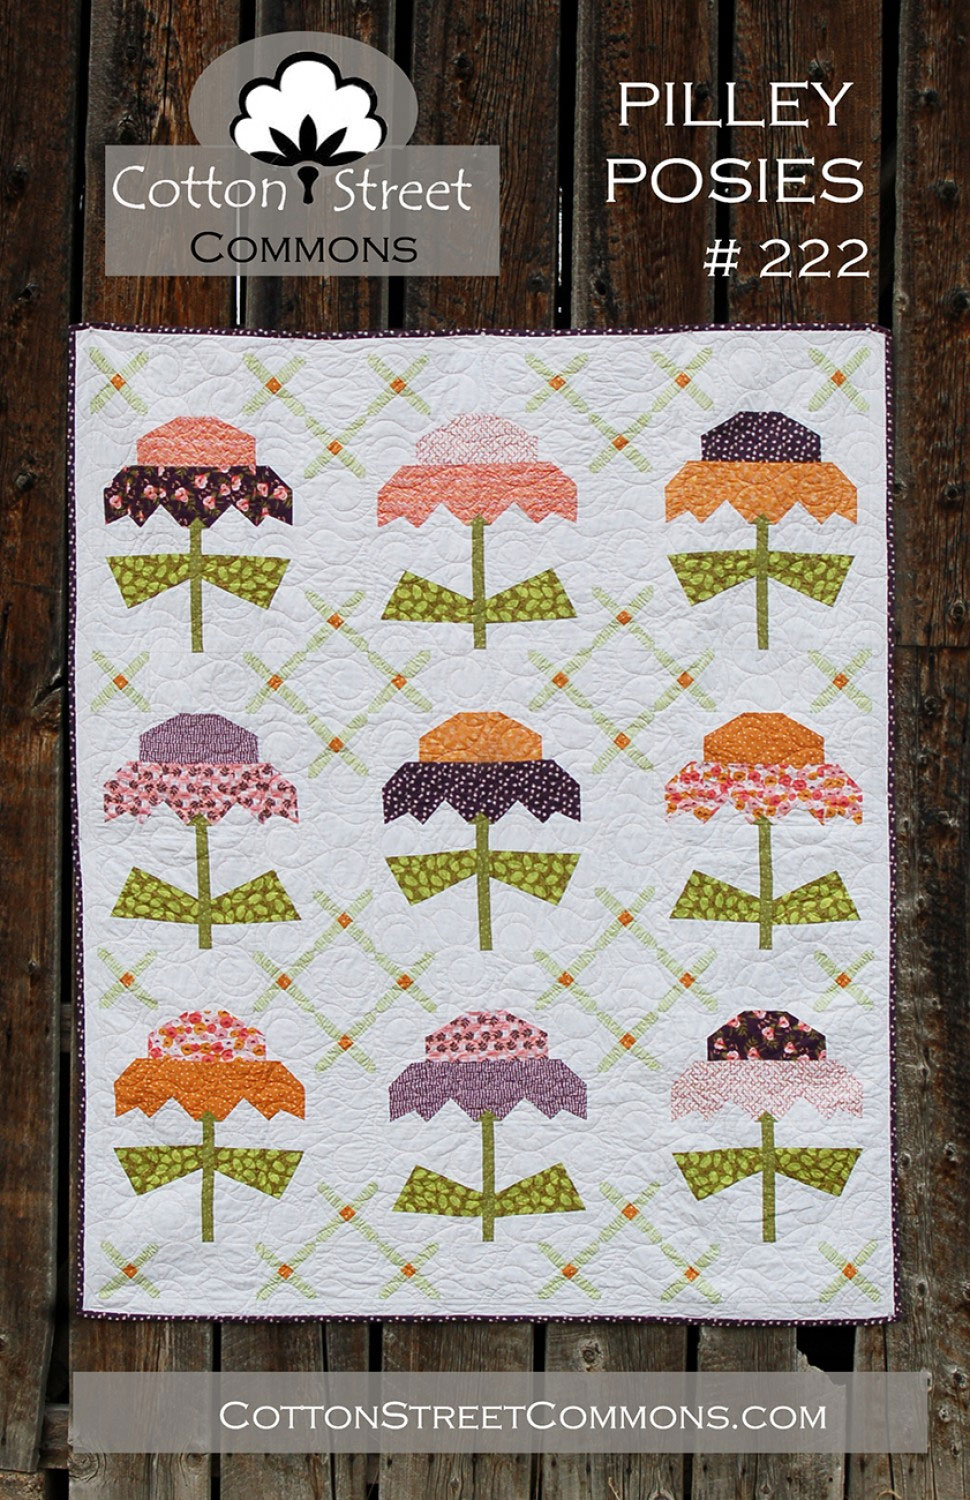 Pilley-Posies-quilt-sewing-pattern-Cotton-Street-Commons-front